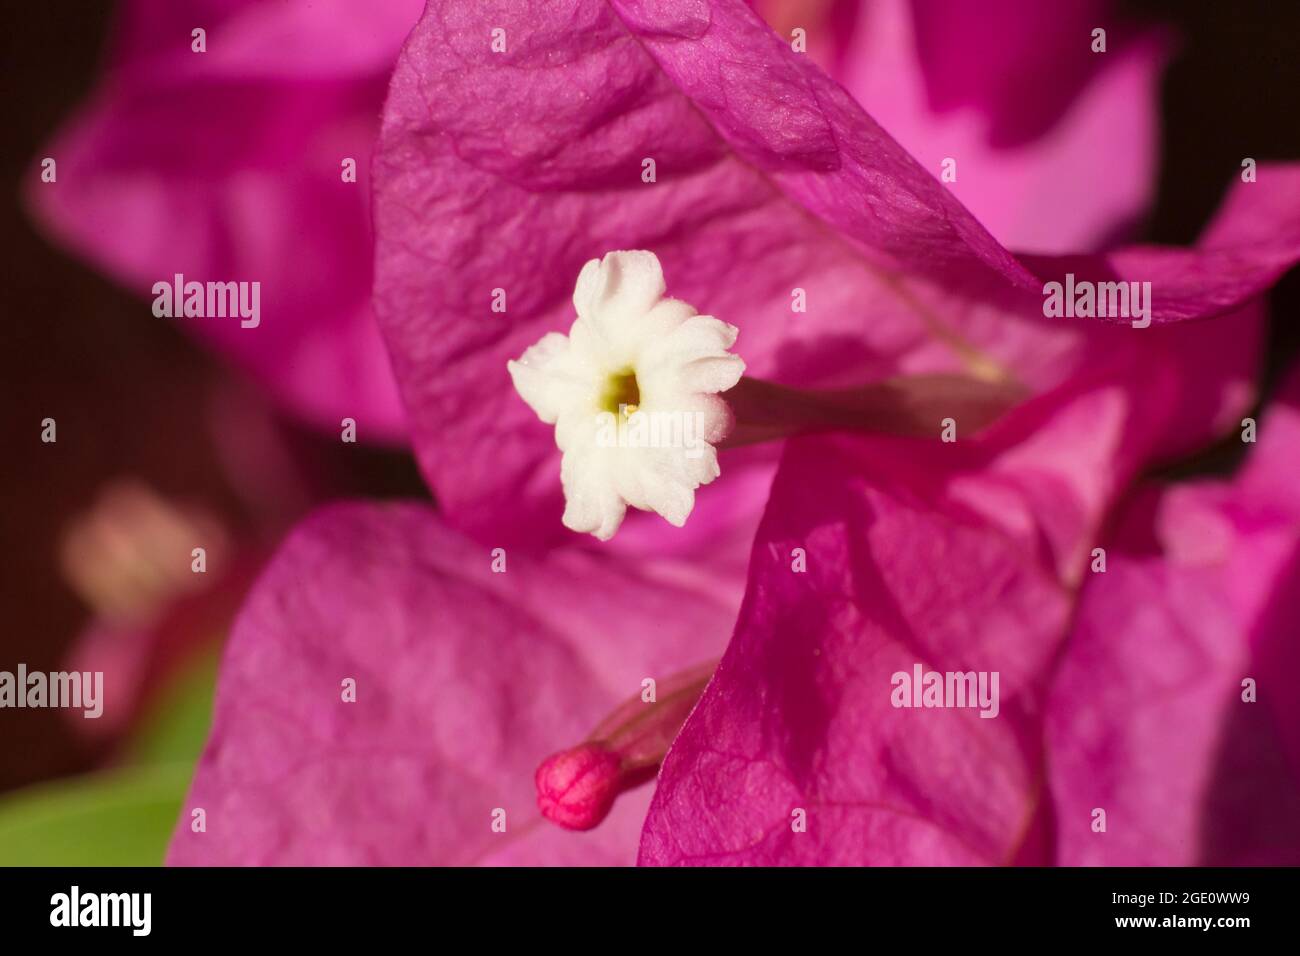 The white petal leaves, crown tube and purple bract leaves of bougainvillea spectabilis flower in macro image Stock Photo